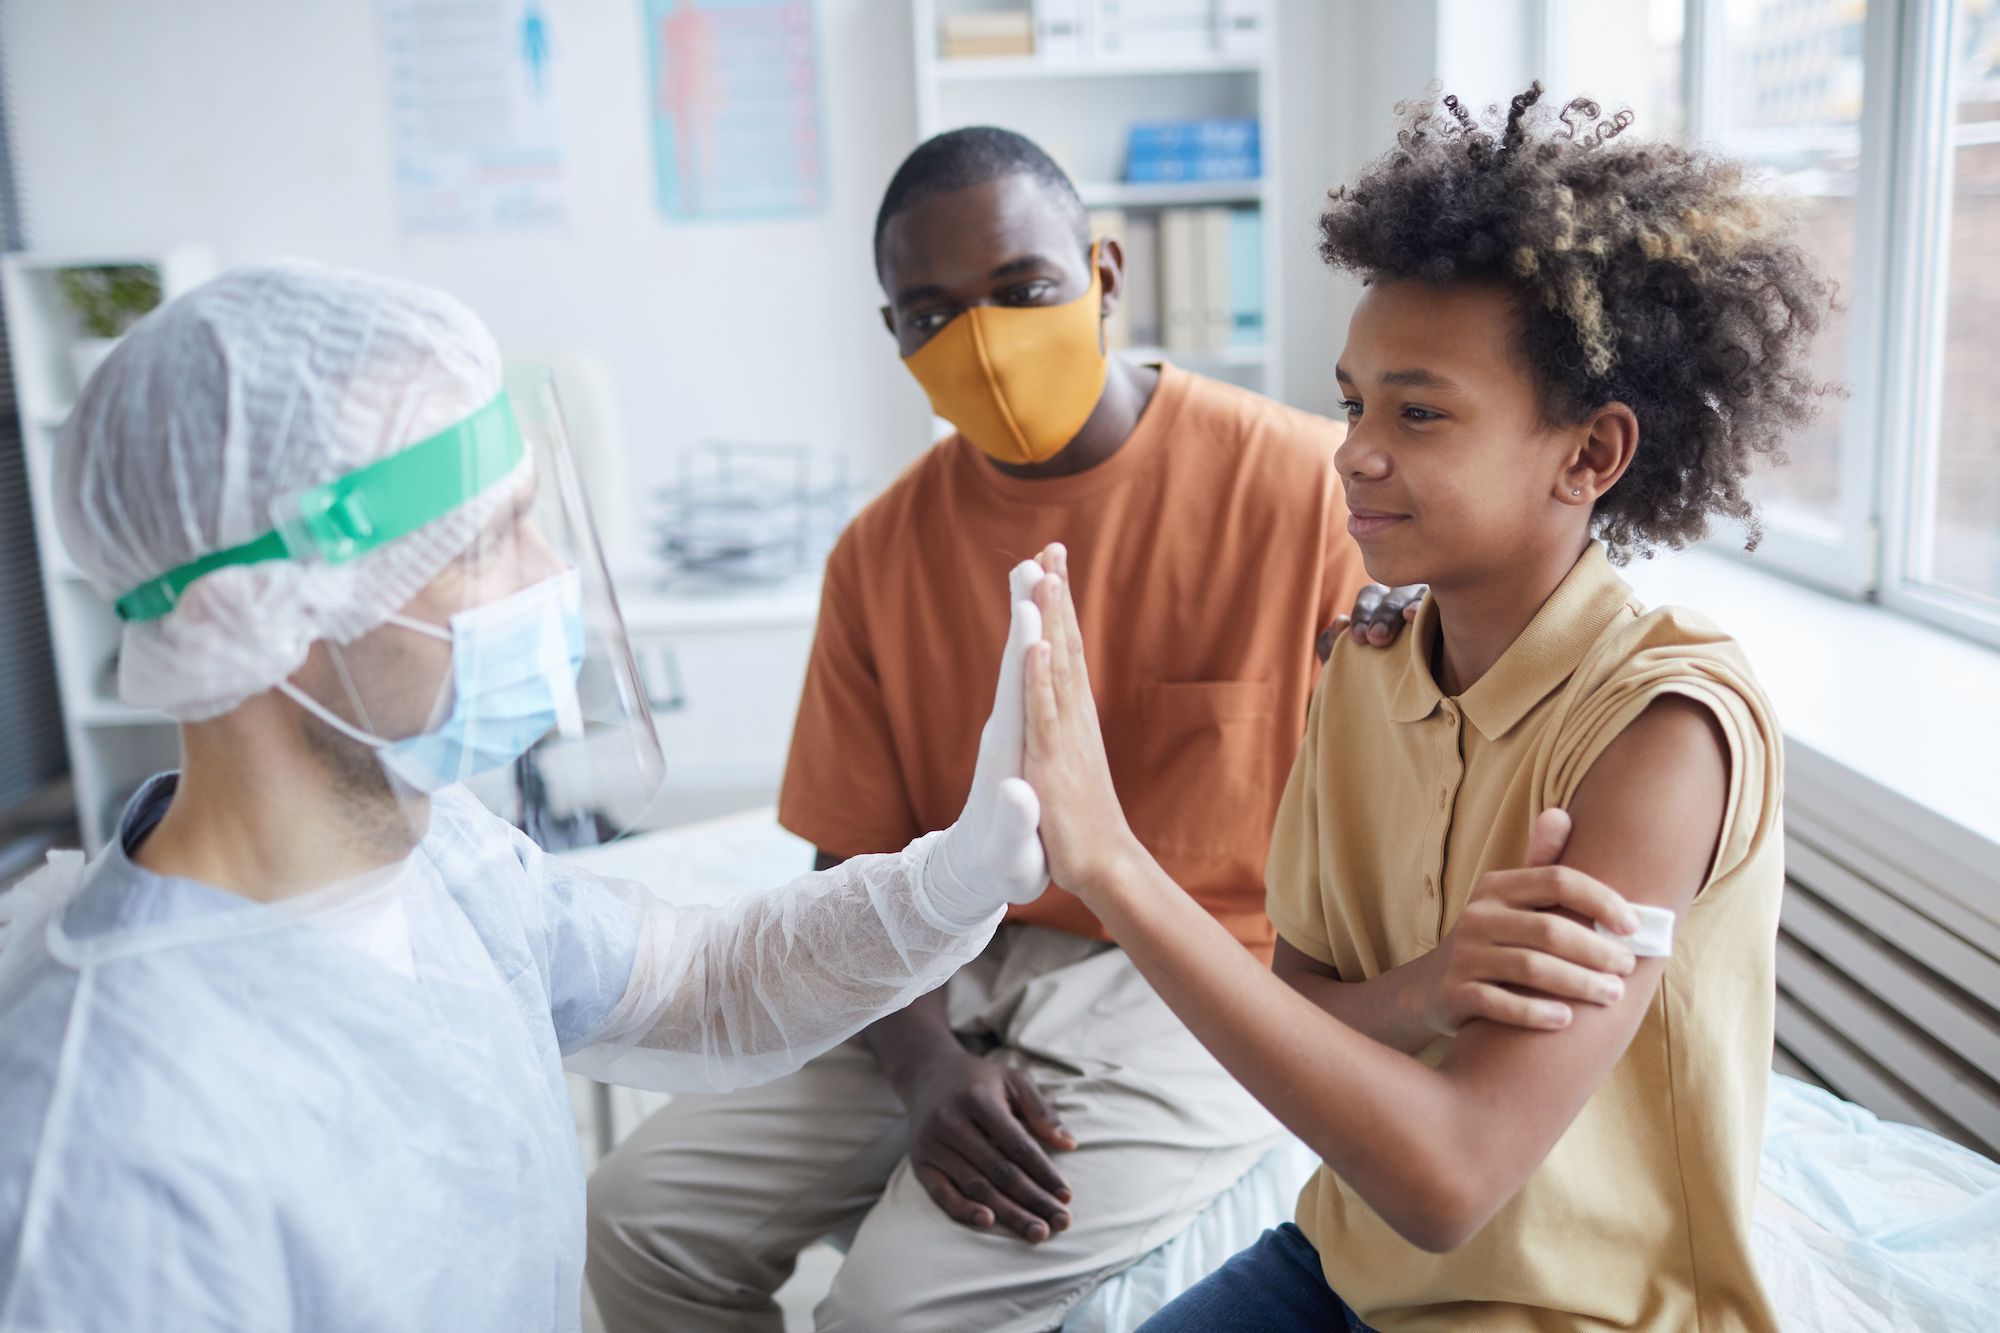 A pediatric patient high-fives their healthcare provider, who is in full PPE, while their parent sits next to them.